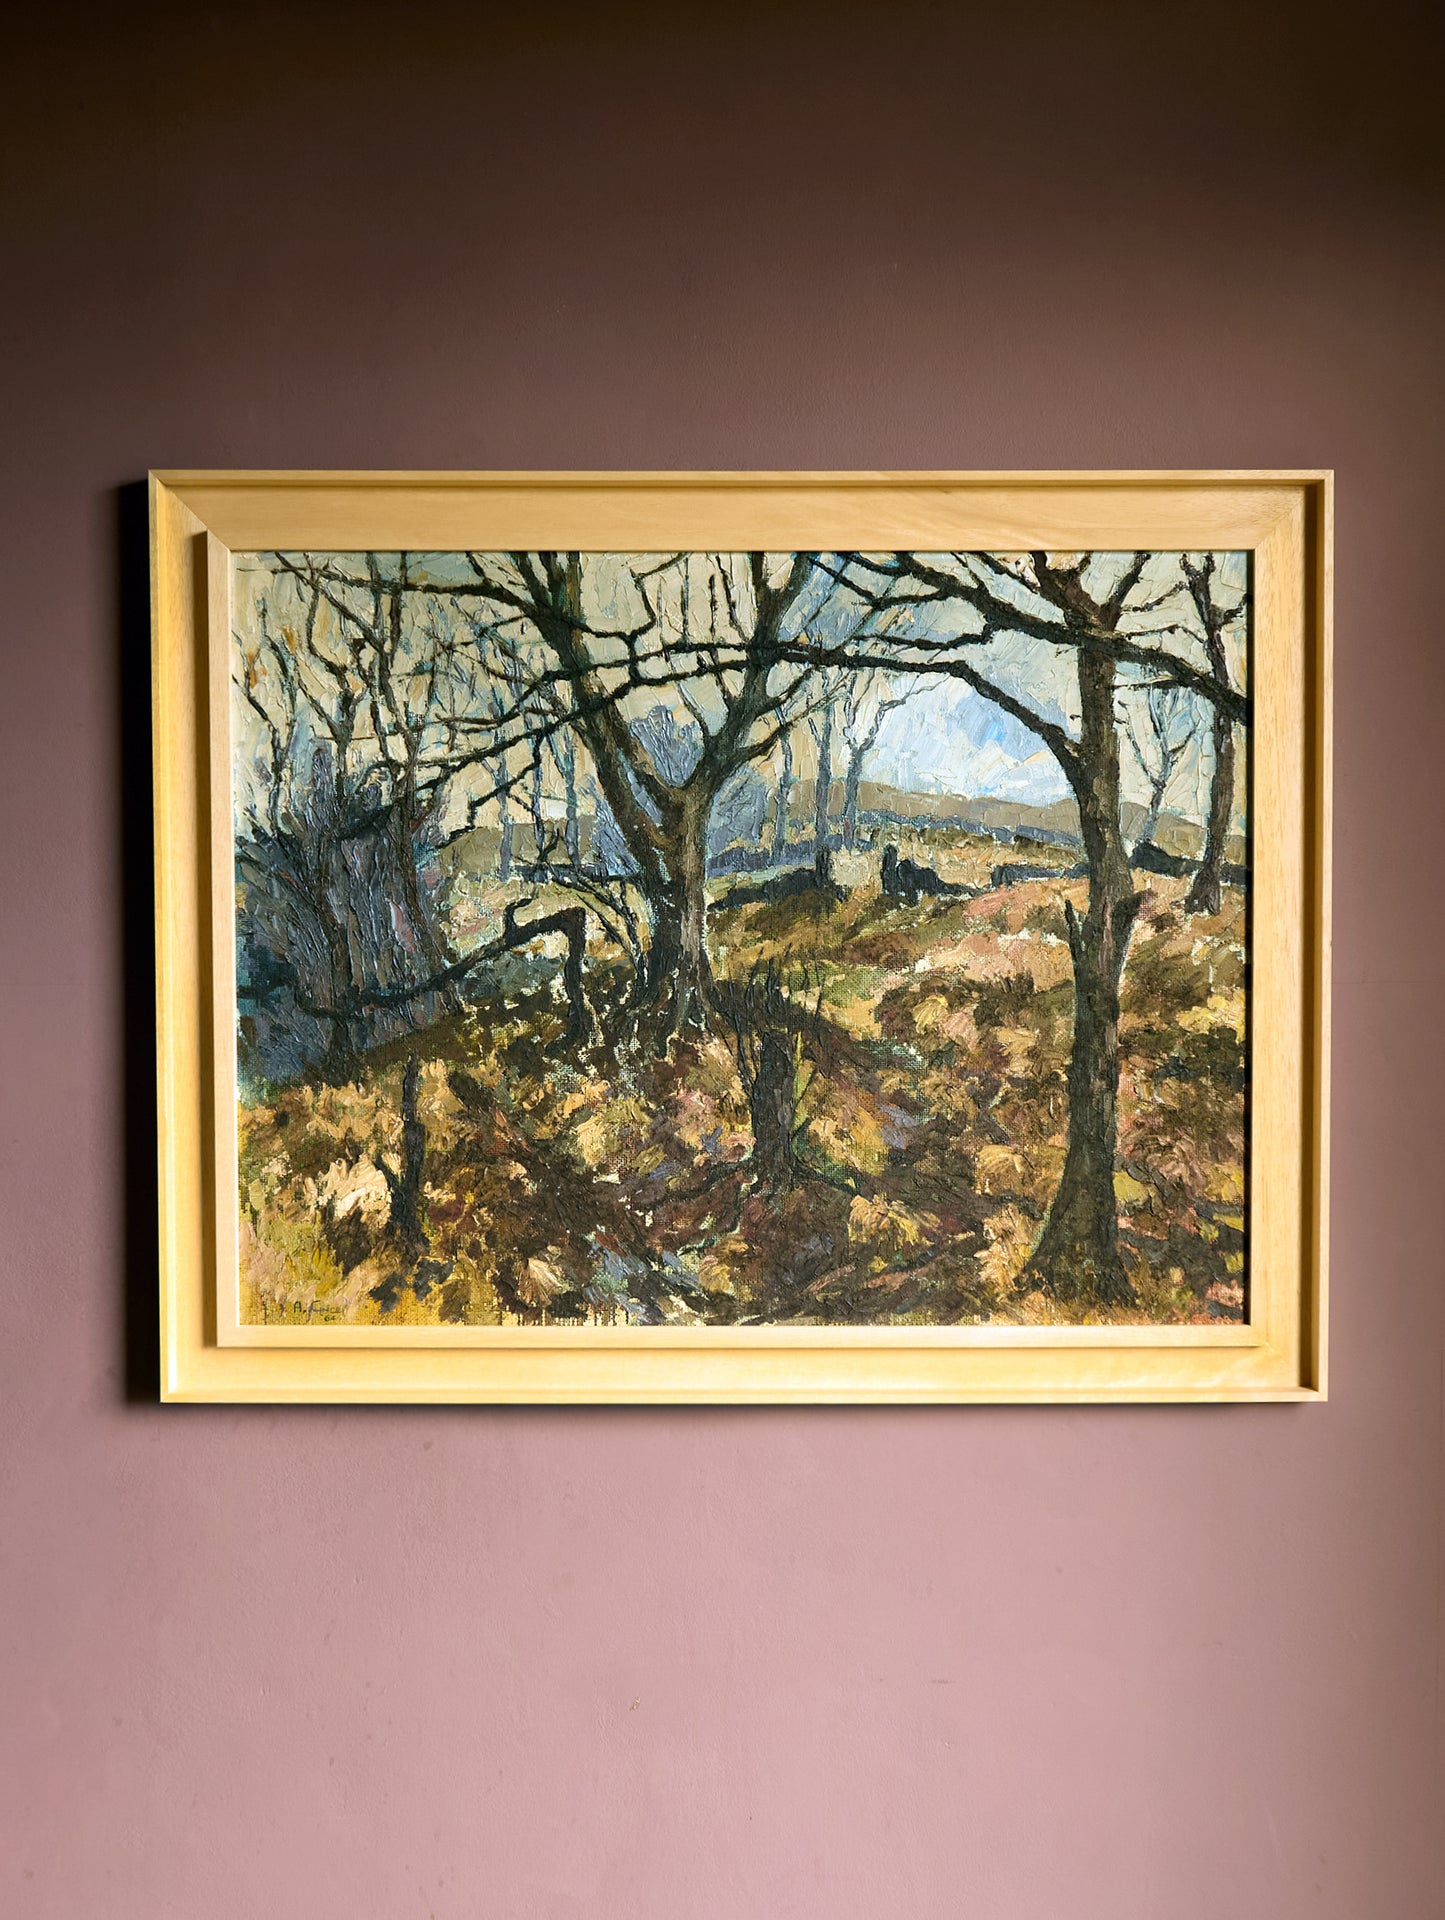 Landscape on board - Signed and dated 1964